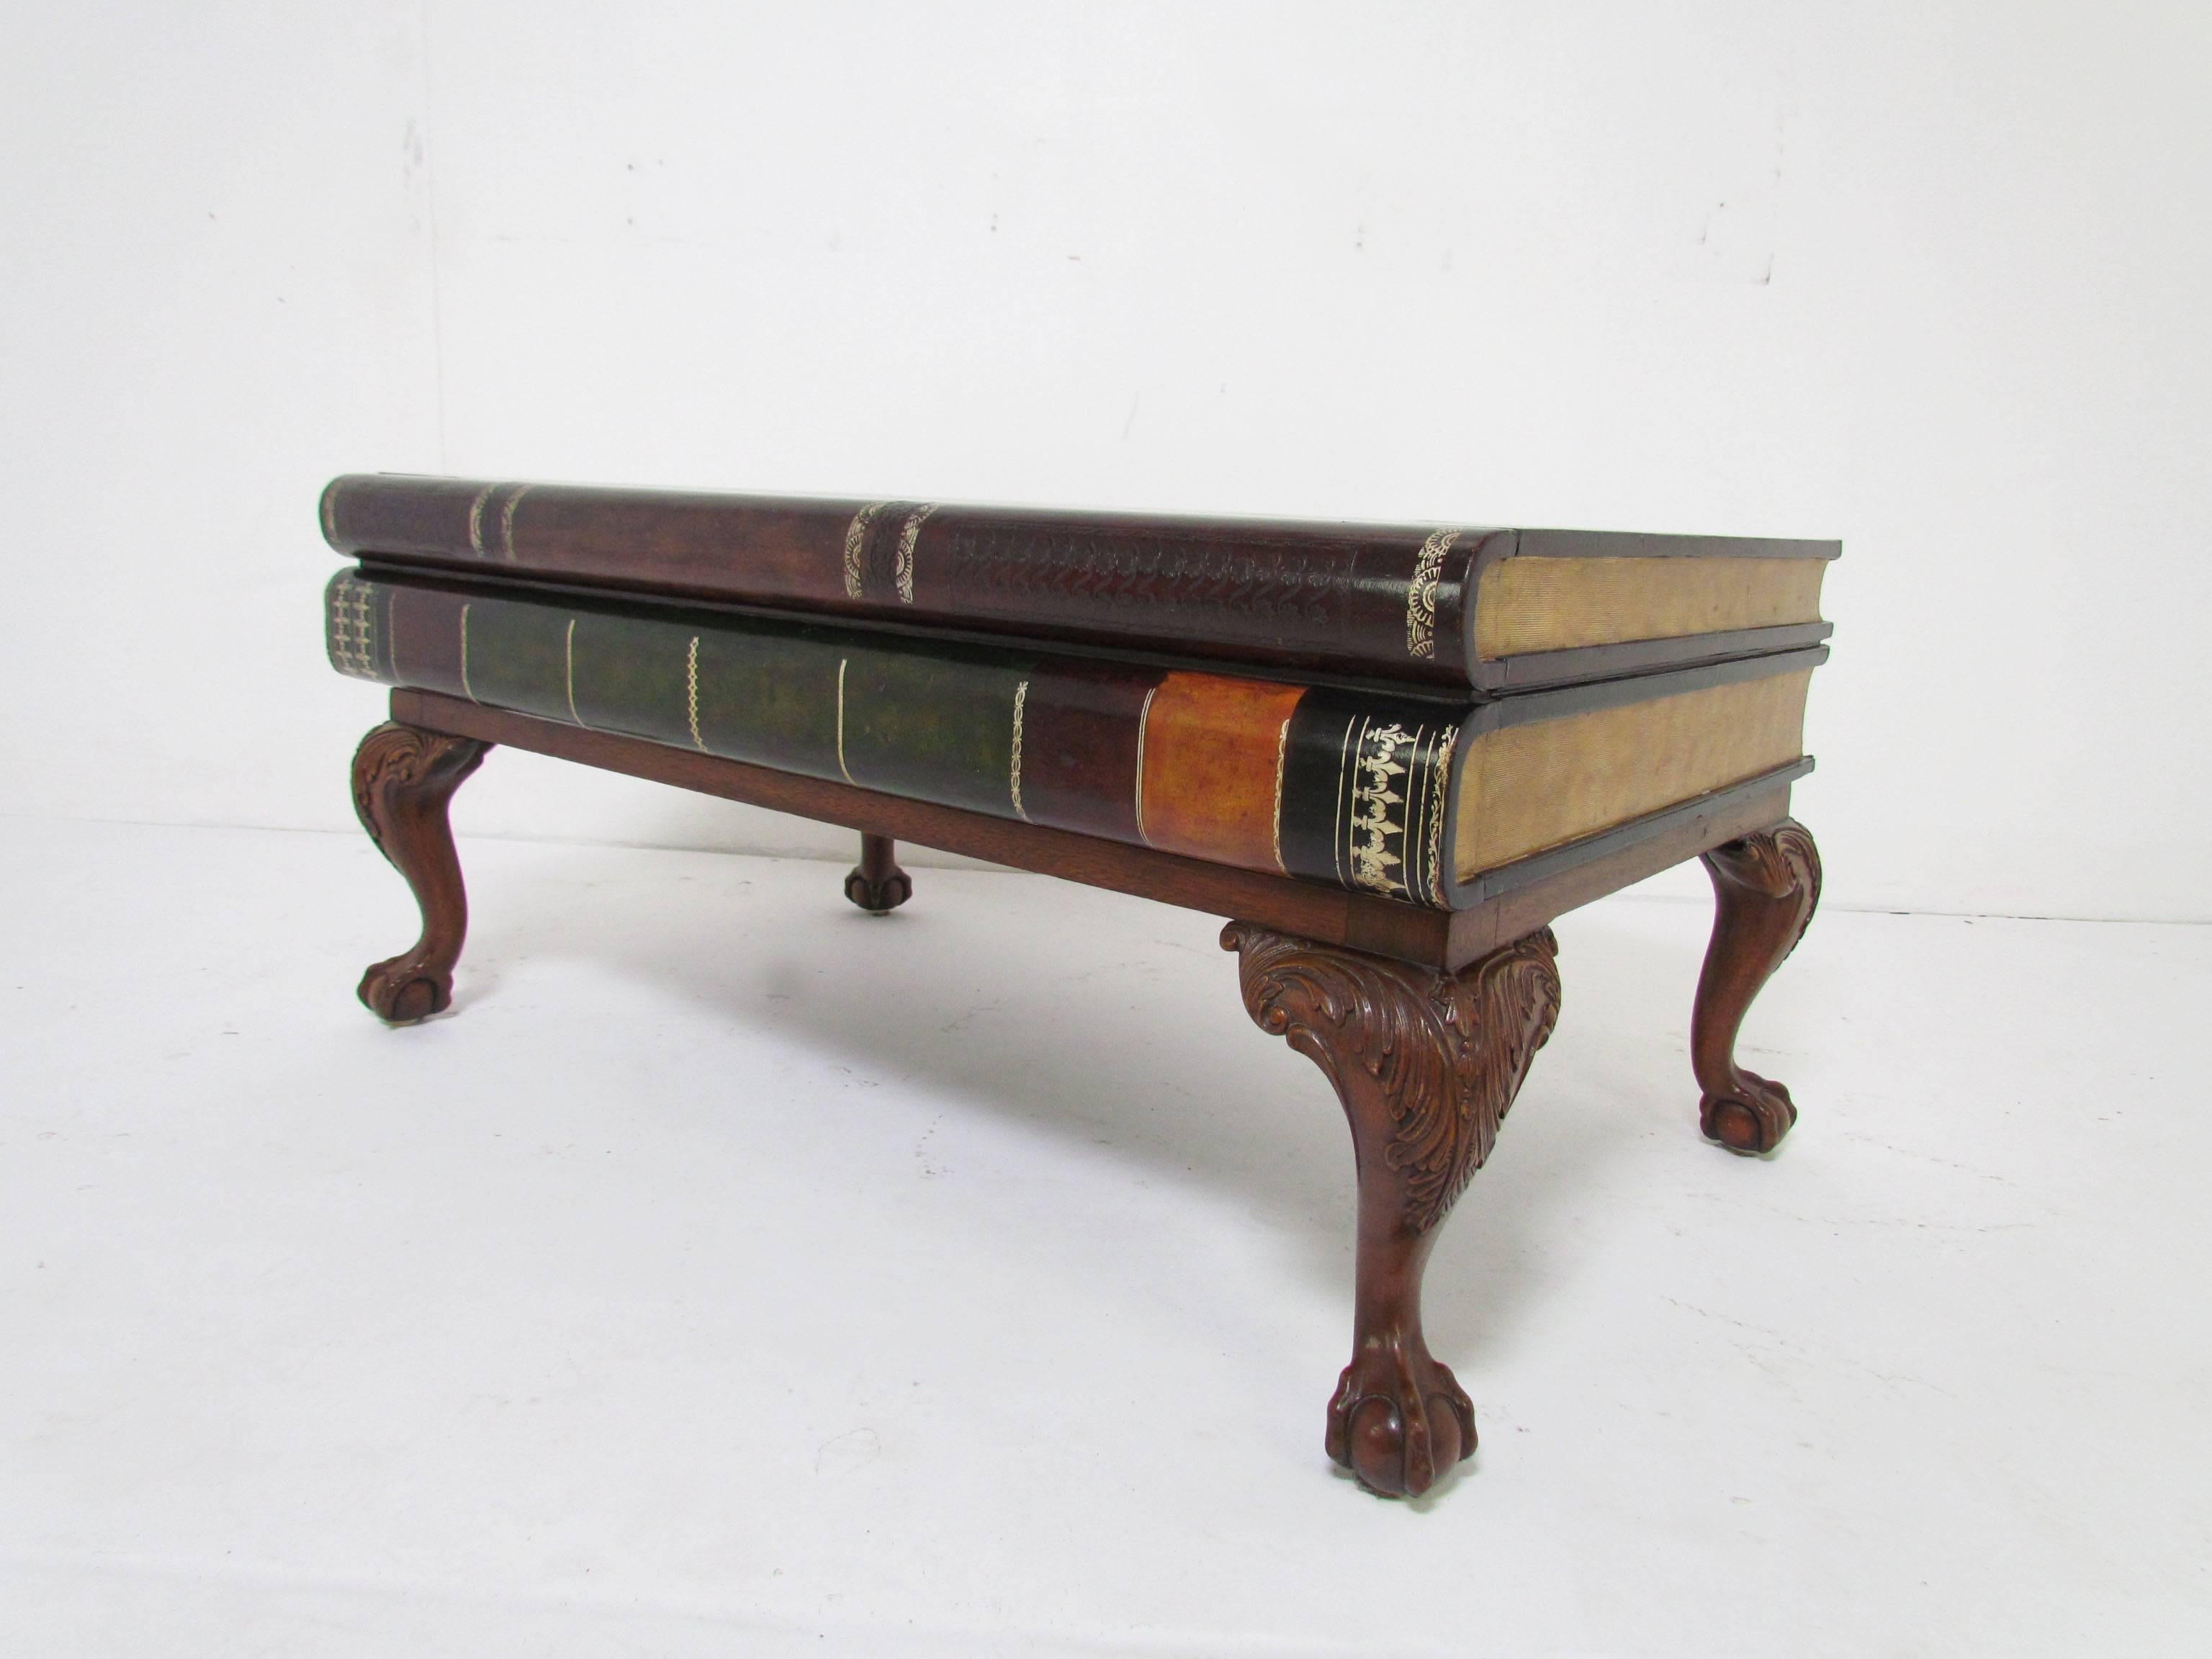 Bibliophile's coffee table by Maitland-Smith in the form of leather bound antiquarian stacked books, with a storage drawer. A rare version of this classic, on Georgian style wooden claw and ball legs.